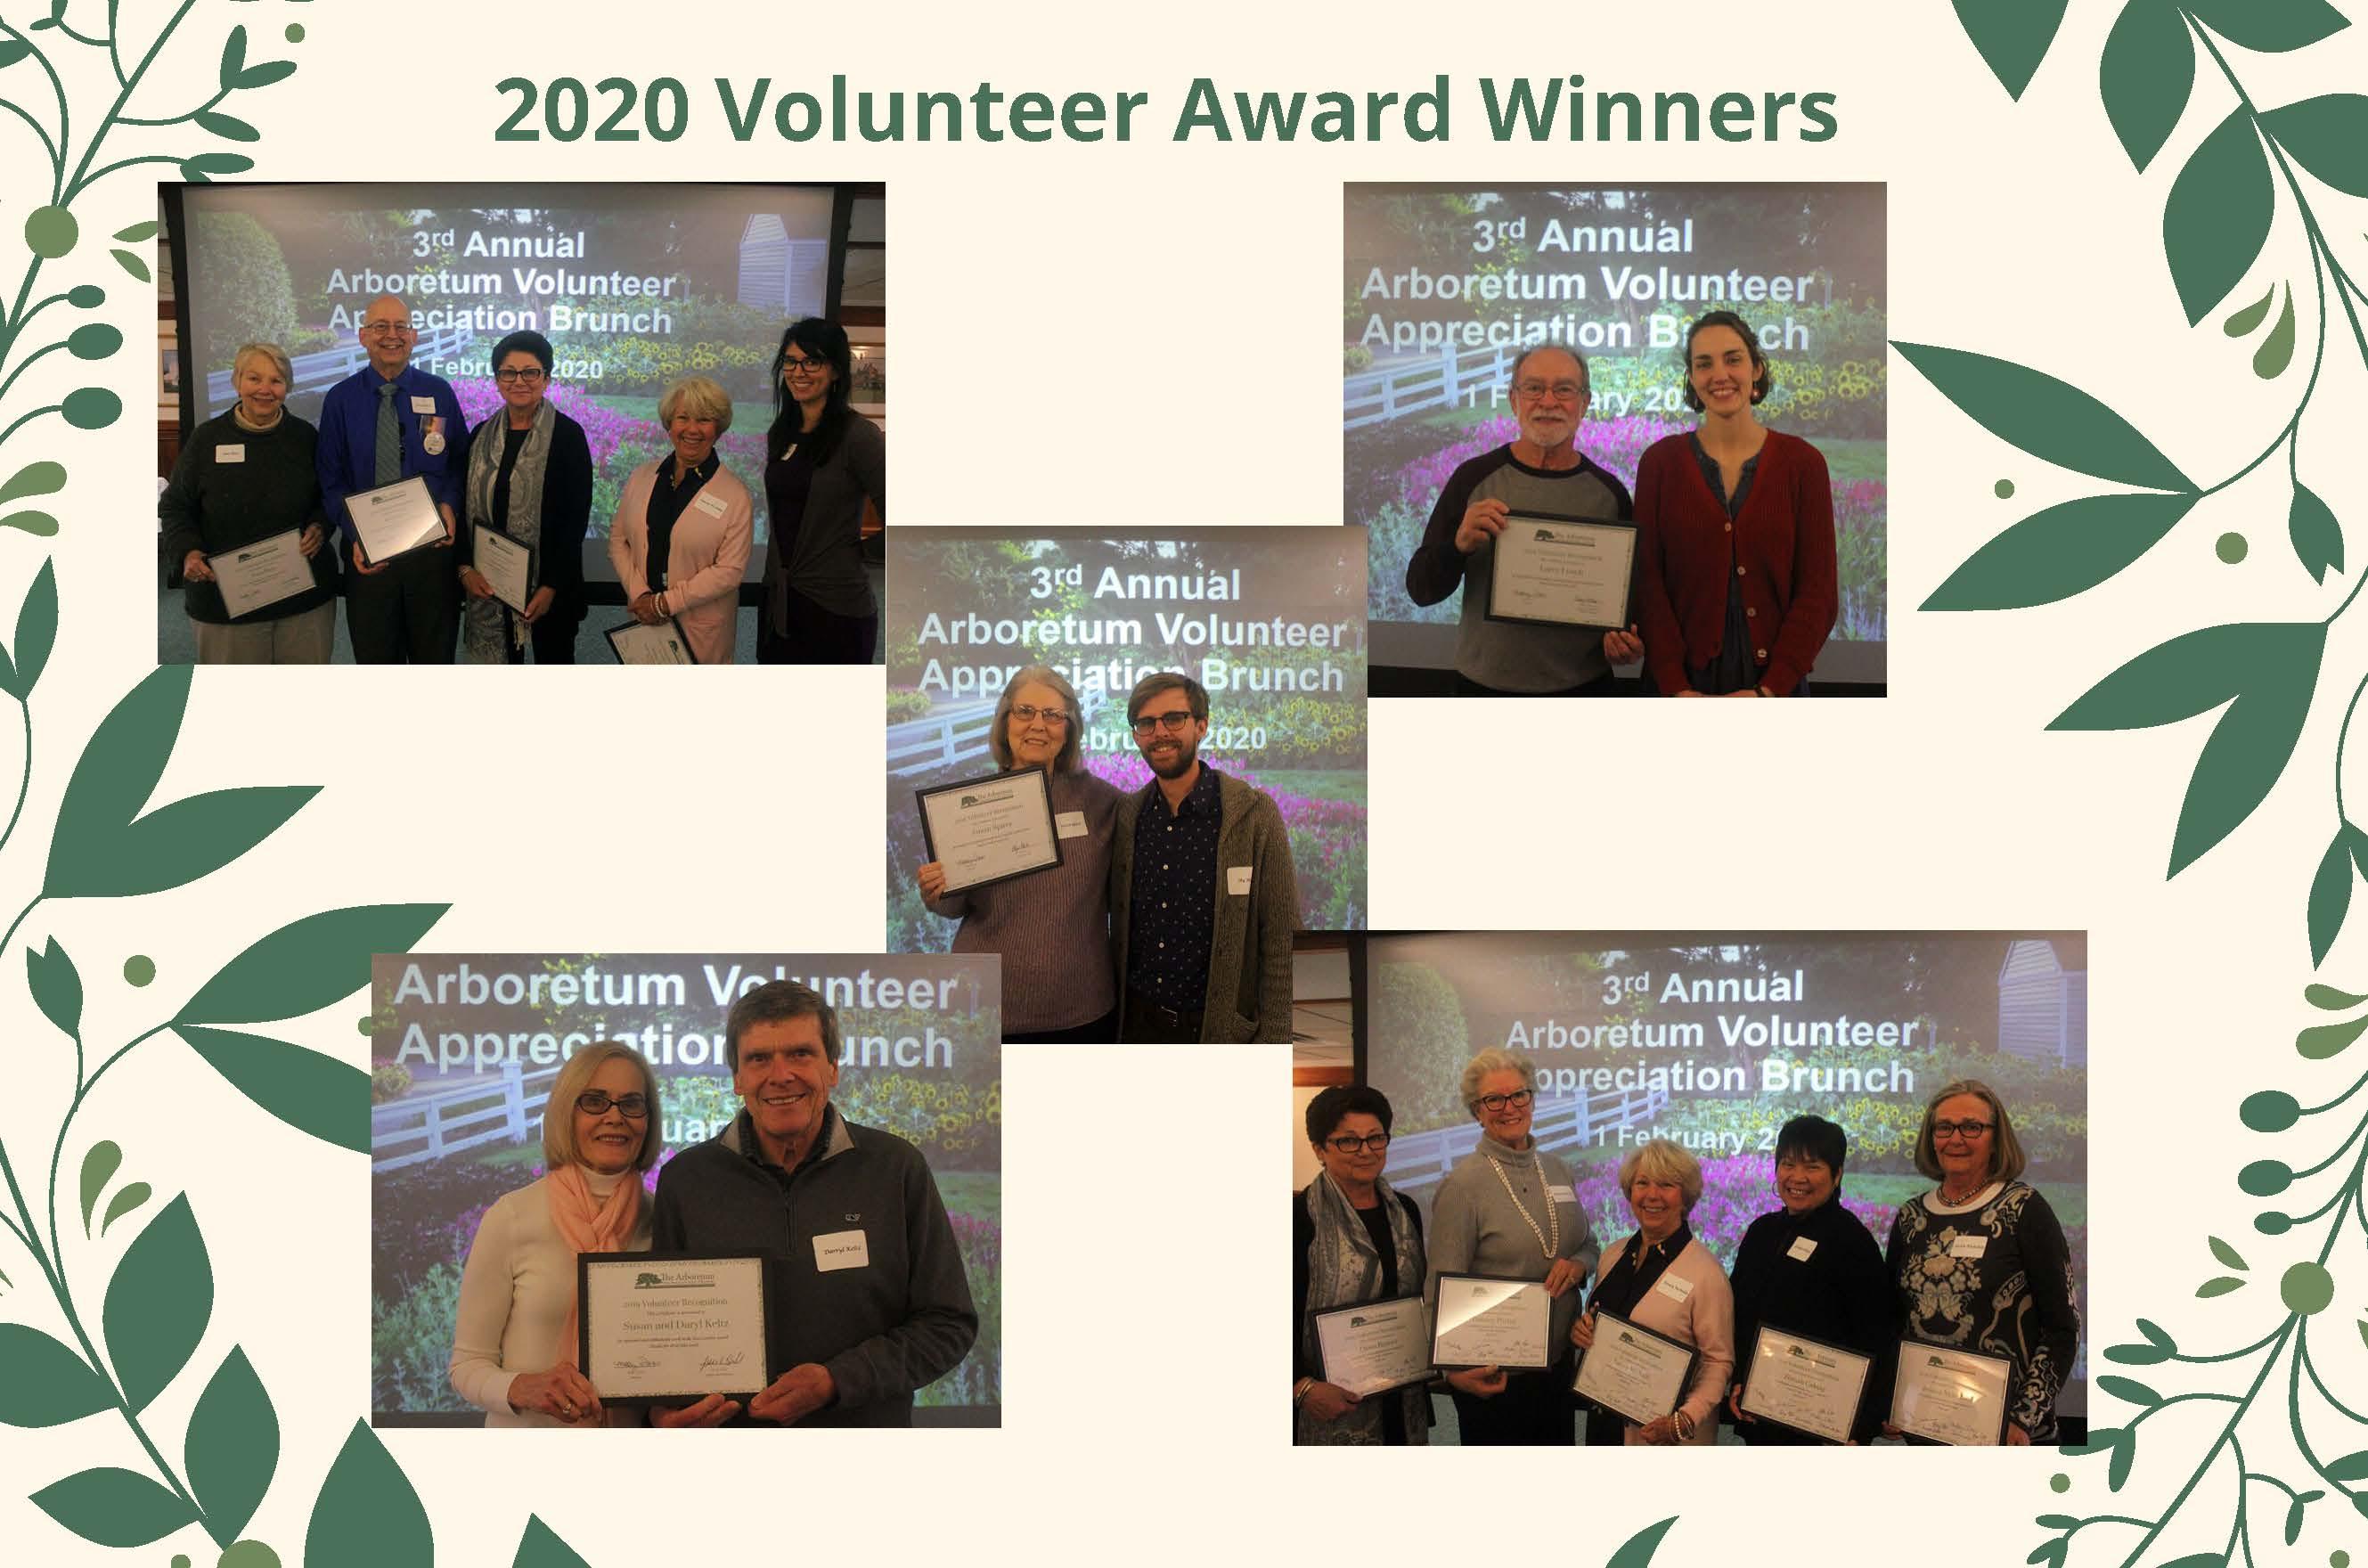 A collage of photos of the 2020 Volunteer Award winners